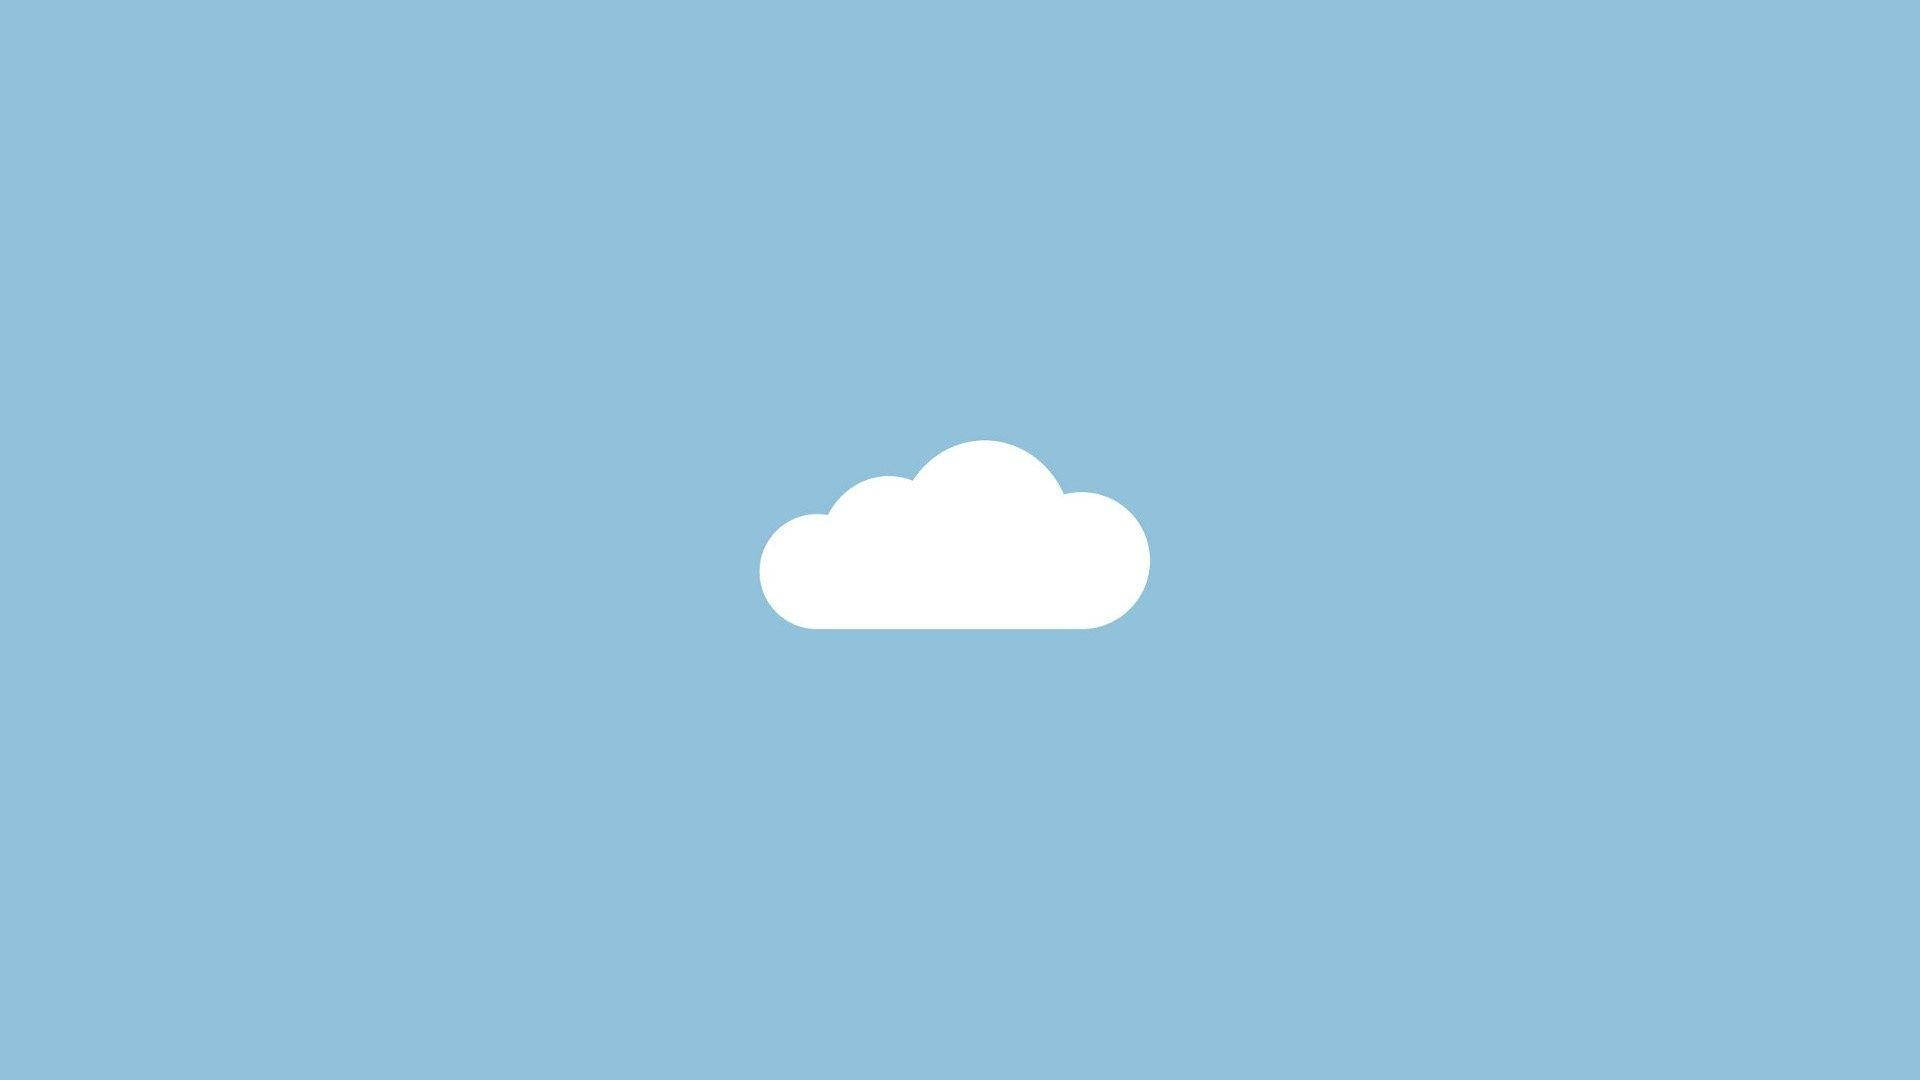 Simple Aesthetic White Cloud